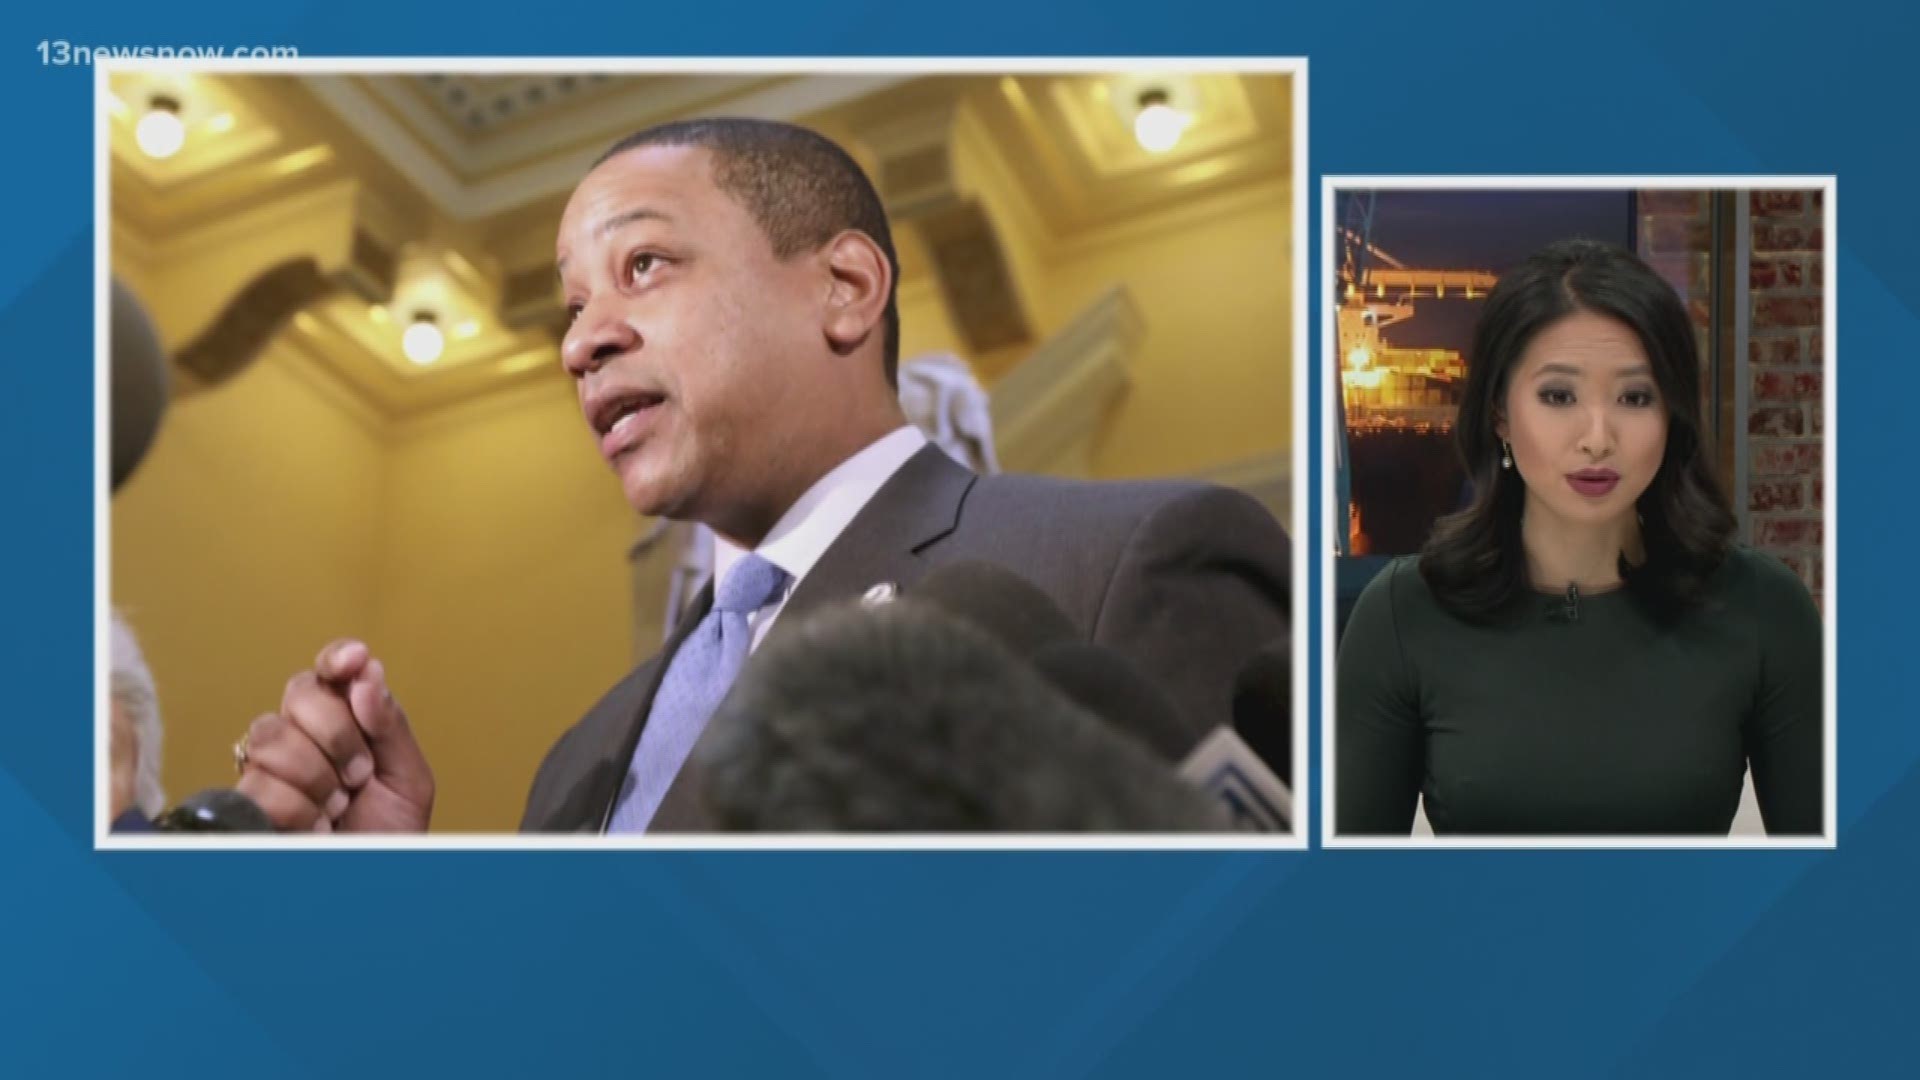 Democratic Lt. Gov. Justin Fairfax issued a statement repeating his strong denials that he had ever sexually assaulted anyone